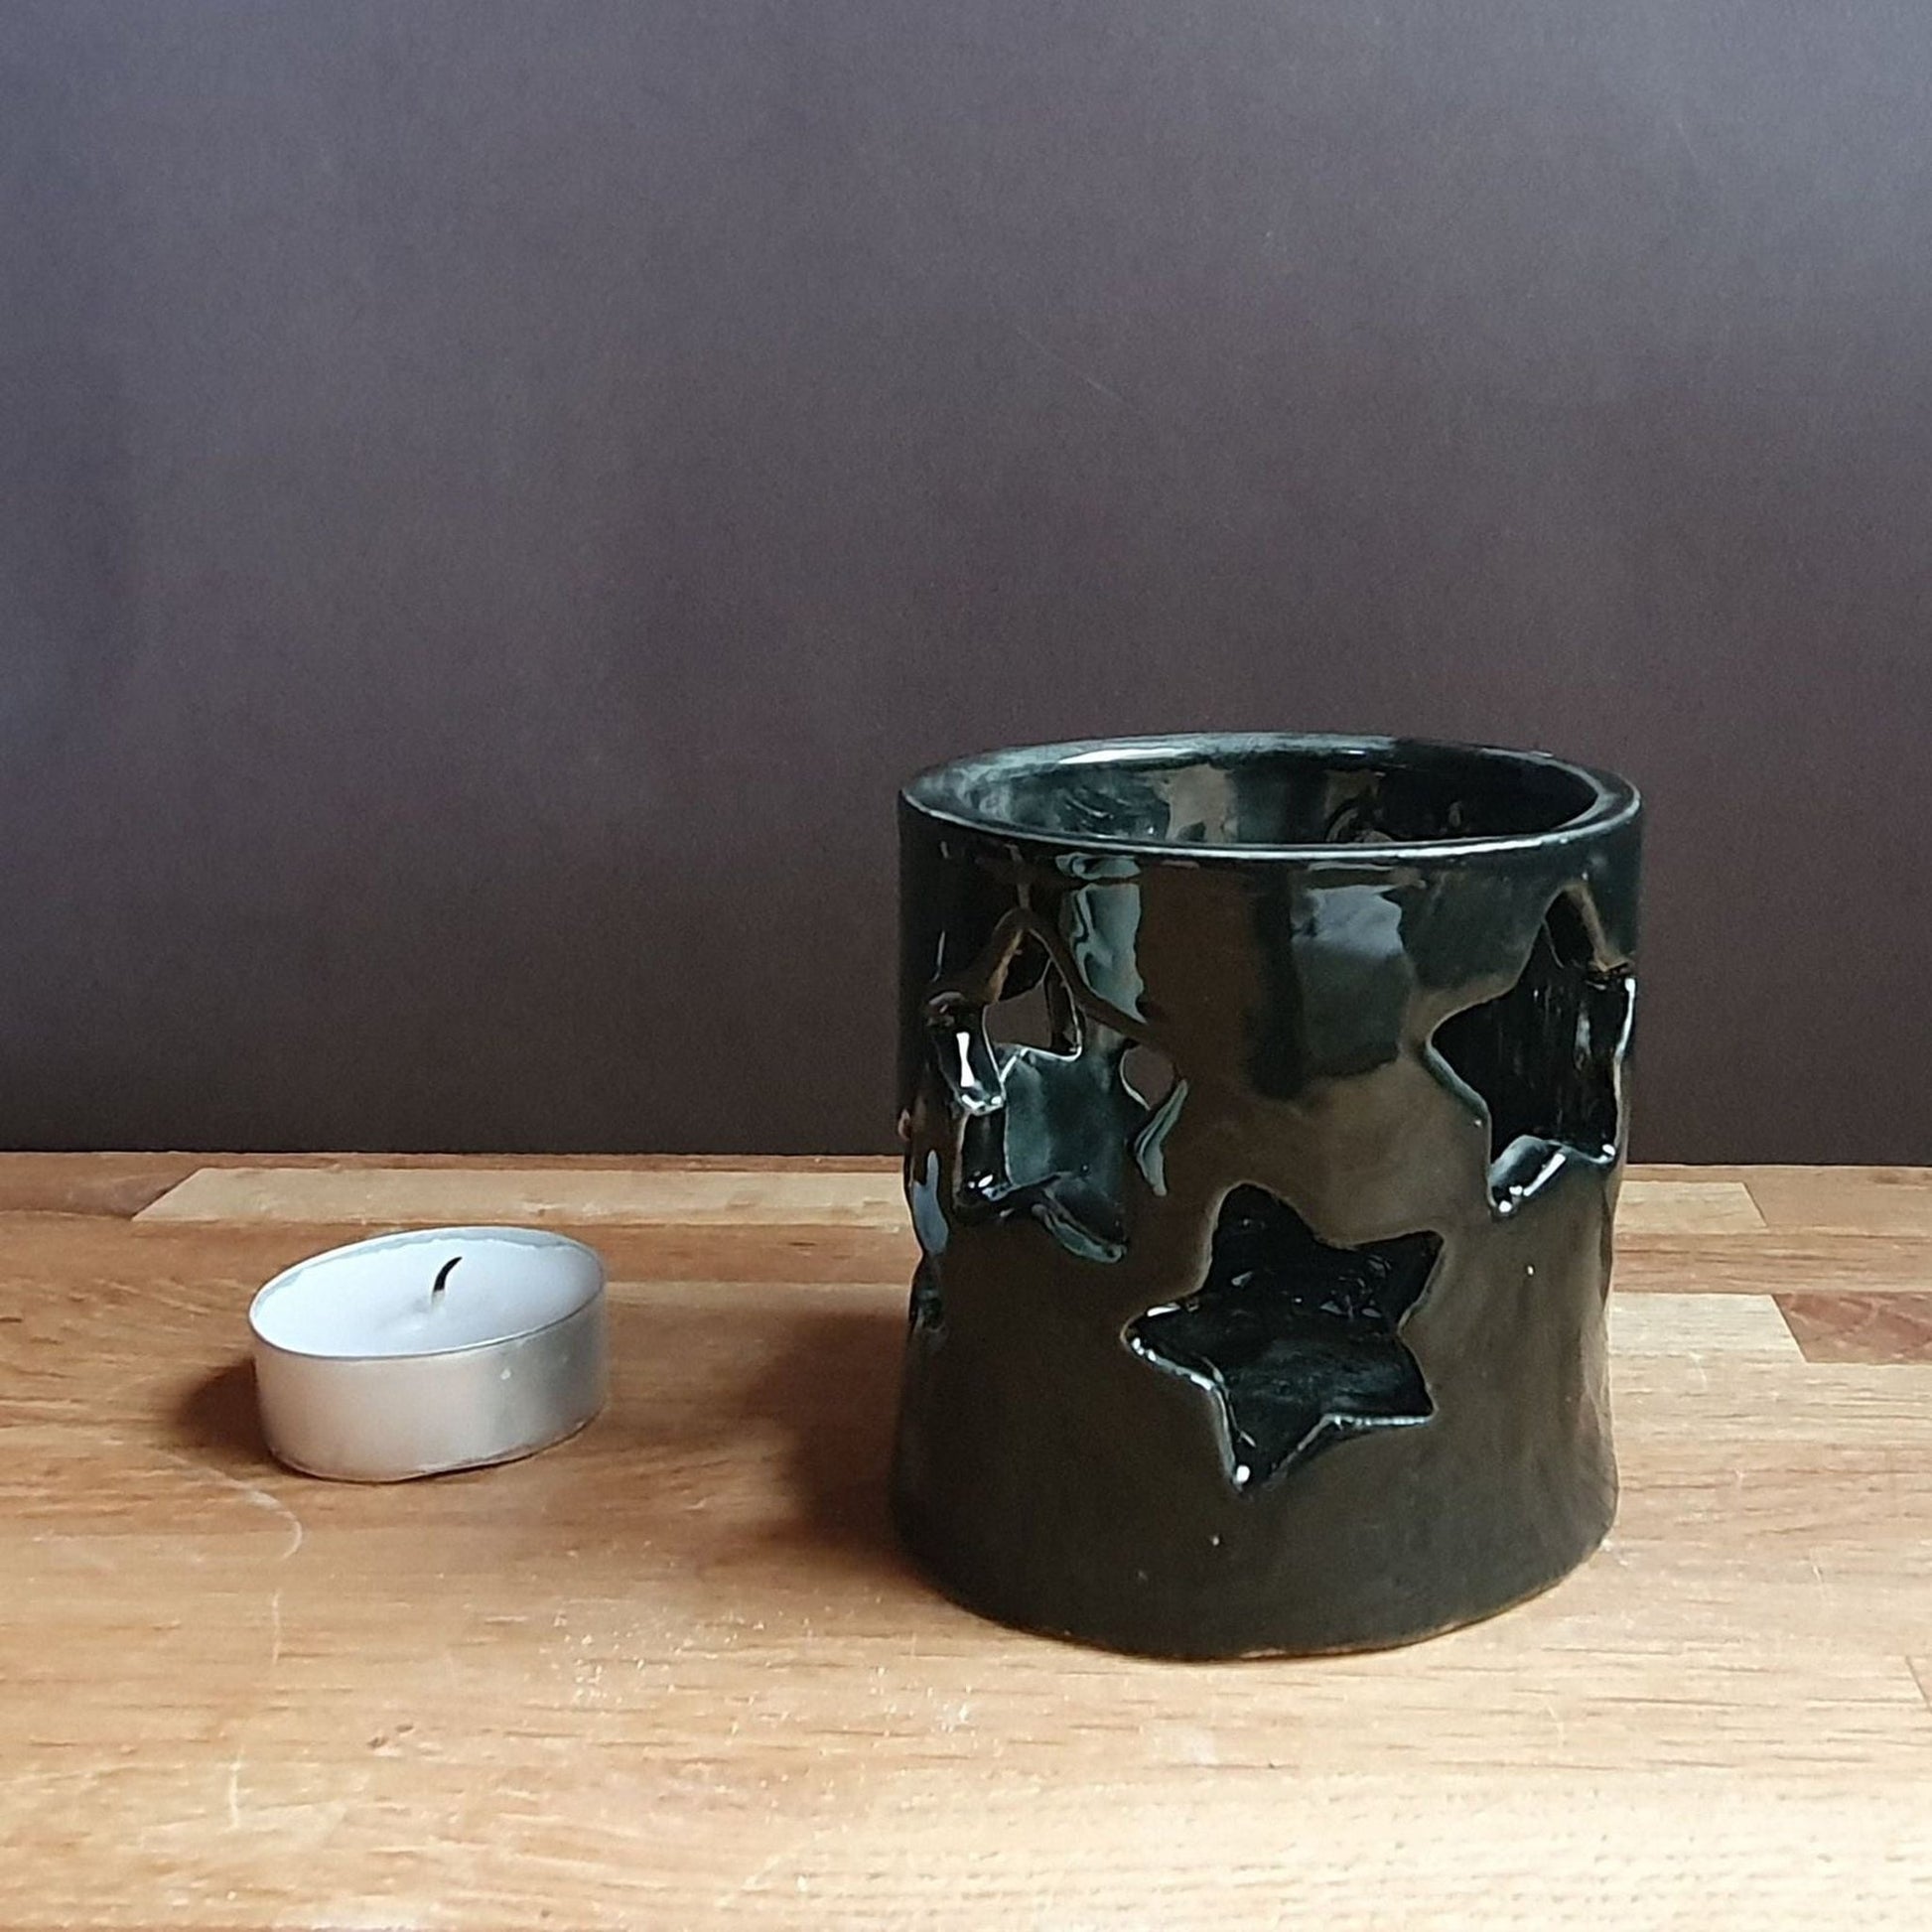 Tealight lantern - with star silhouettes